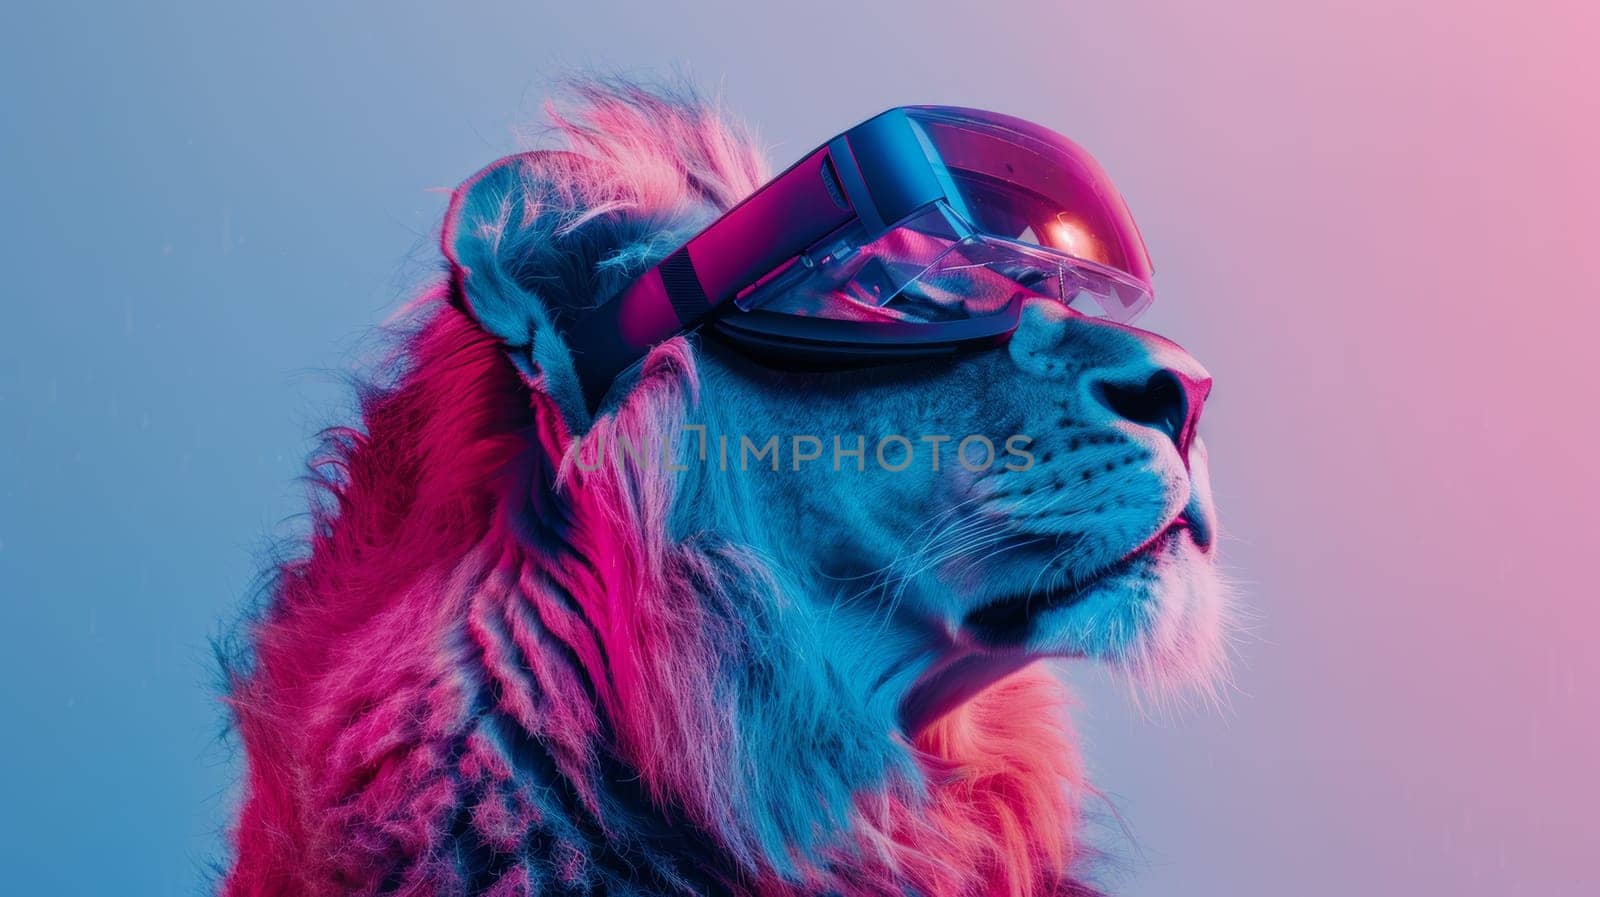 A lion wearing a pair of virtual reality glasses with colorful background